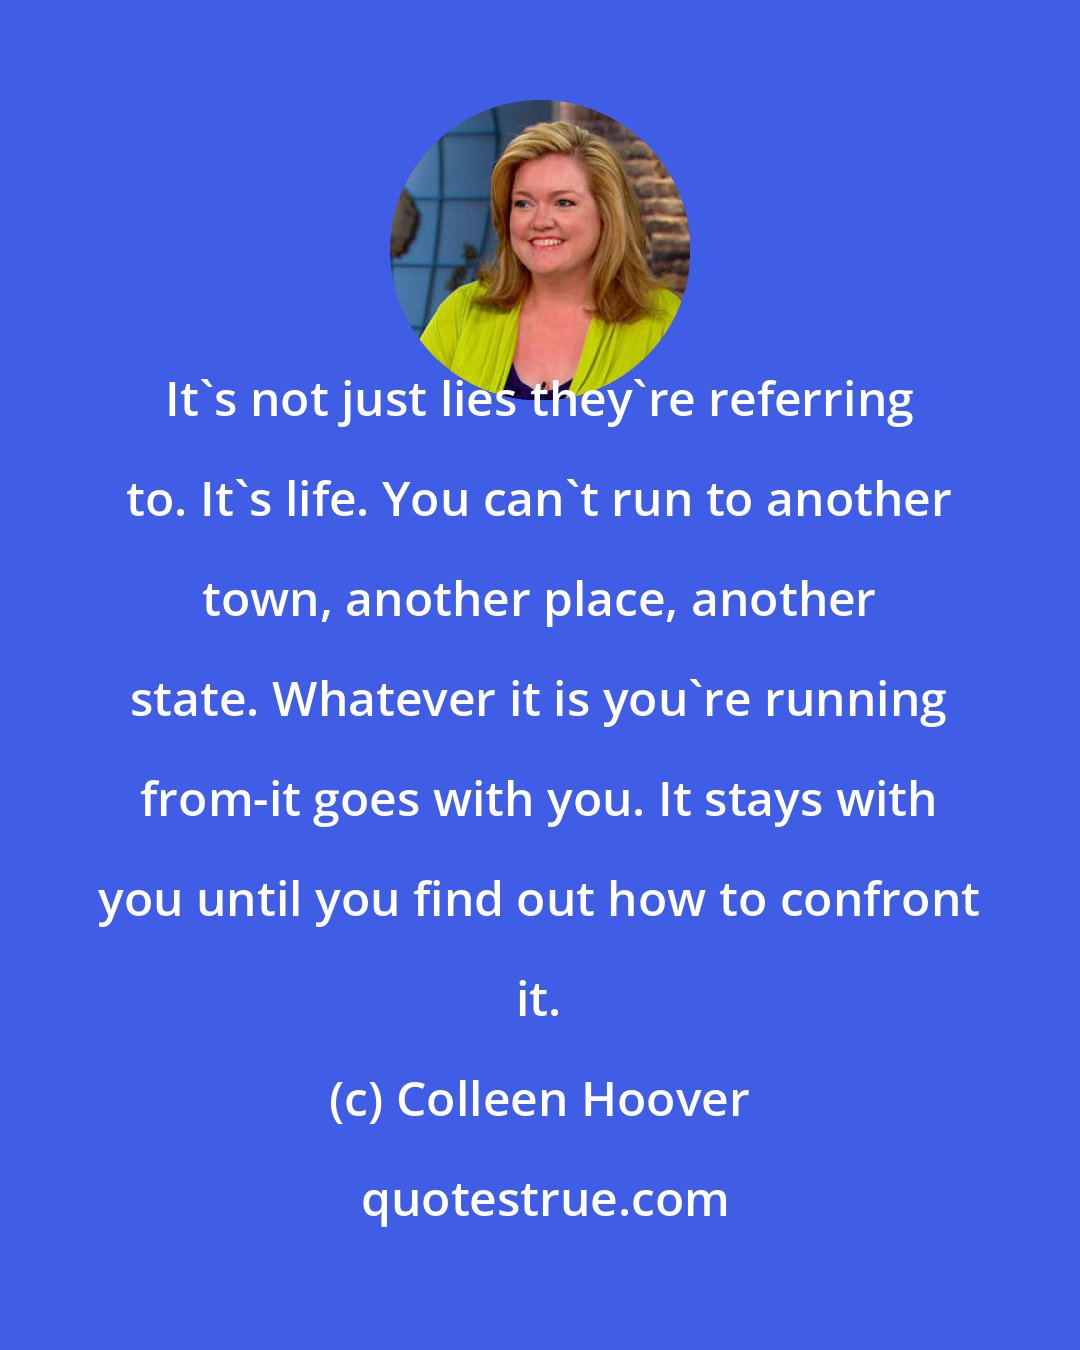 Colleen Hoover: It's not just lies they're referring to. It's life. You can't run to another town, another place, another state. Whatever it is you're running from-it goes with you. It stays with you until you find out how to confront it.